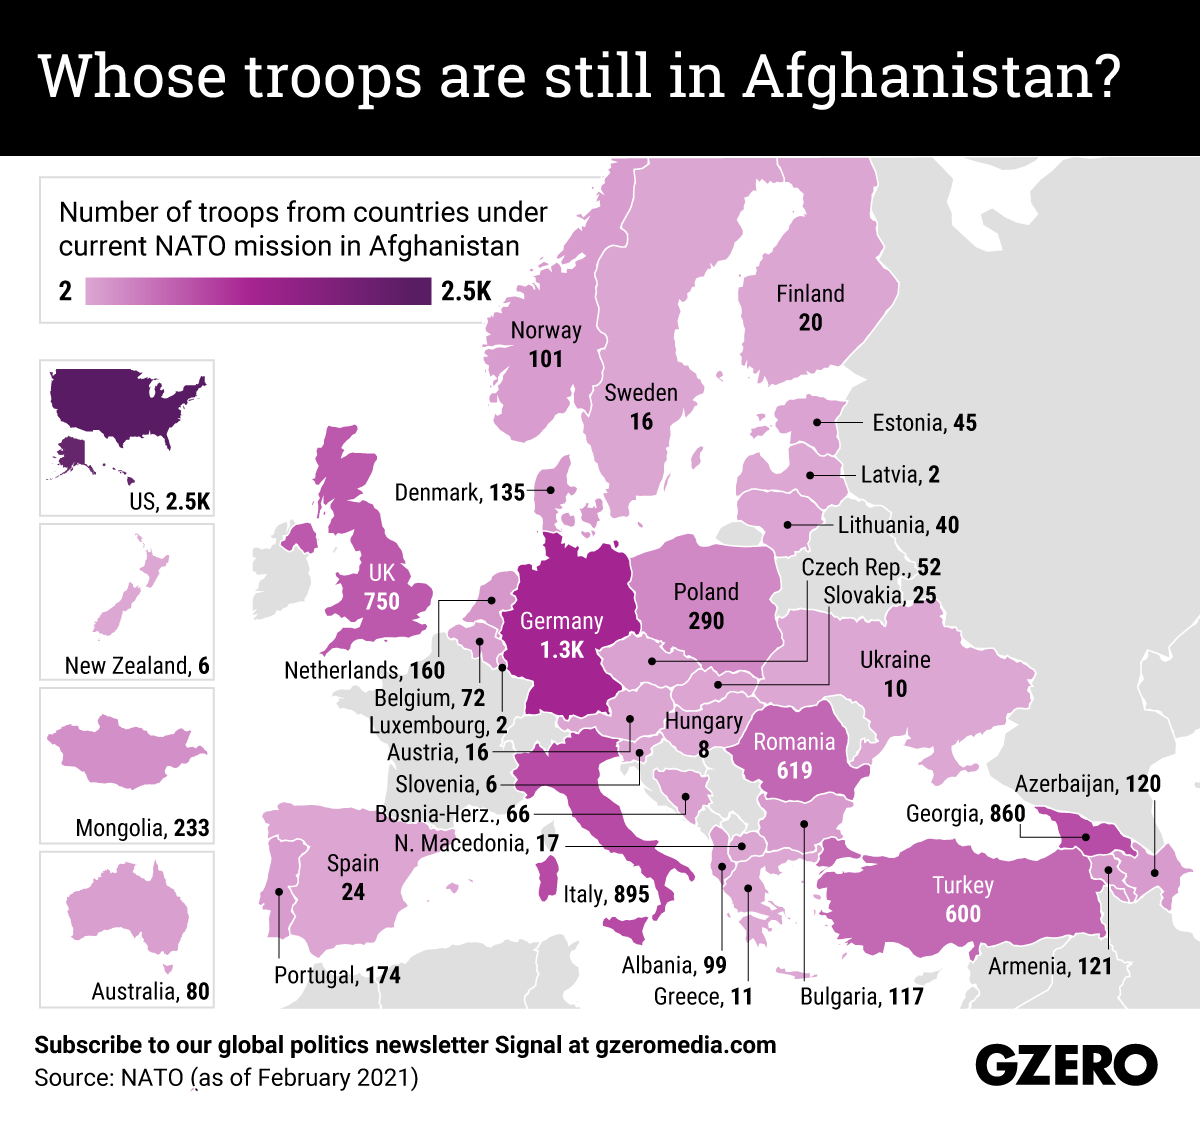 The Graphic Truth: Whose troops are still in Afghanistan?